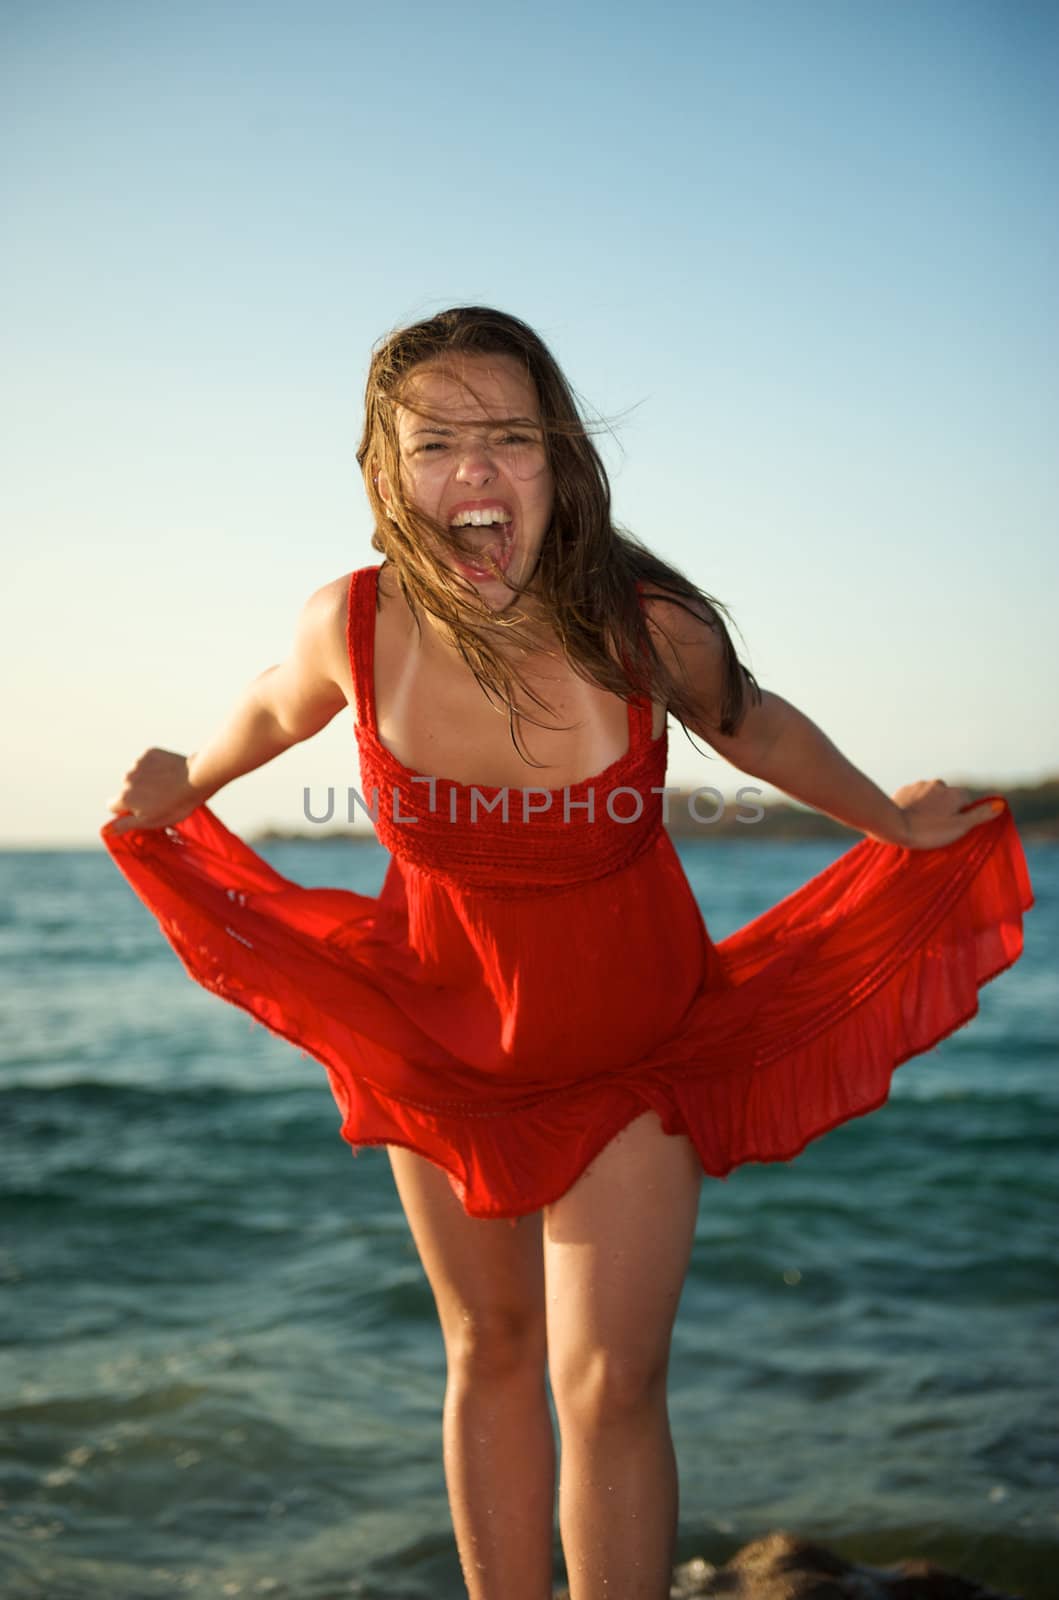 Pretty girl screaming on the beach during her vacation